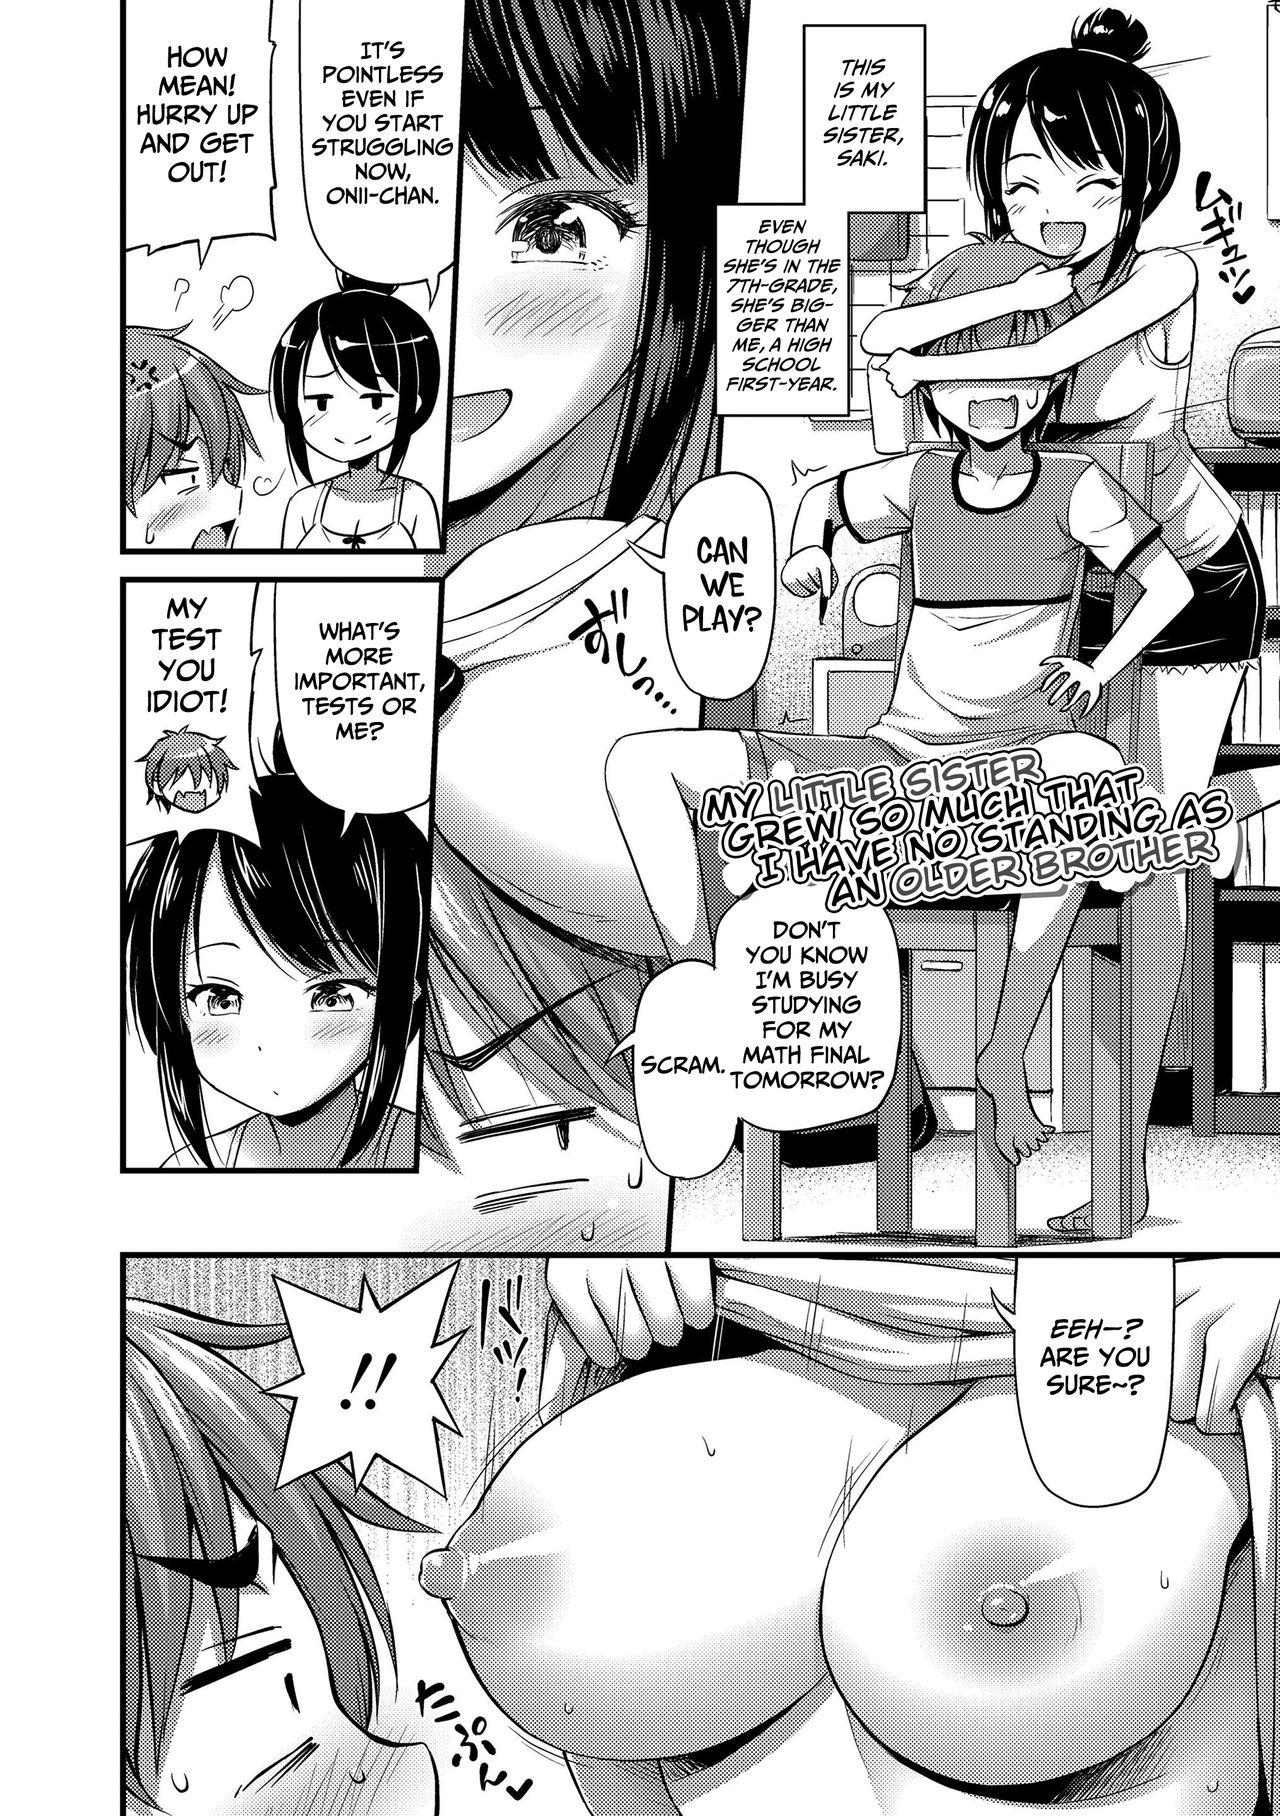 Jocks Imouto ga Sodachi Sugite Ani no Tachiba ga Nai | My Little Sister Grew So Much That I Have No Standing as an Older Brother Nipple - Page 2